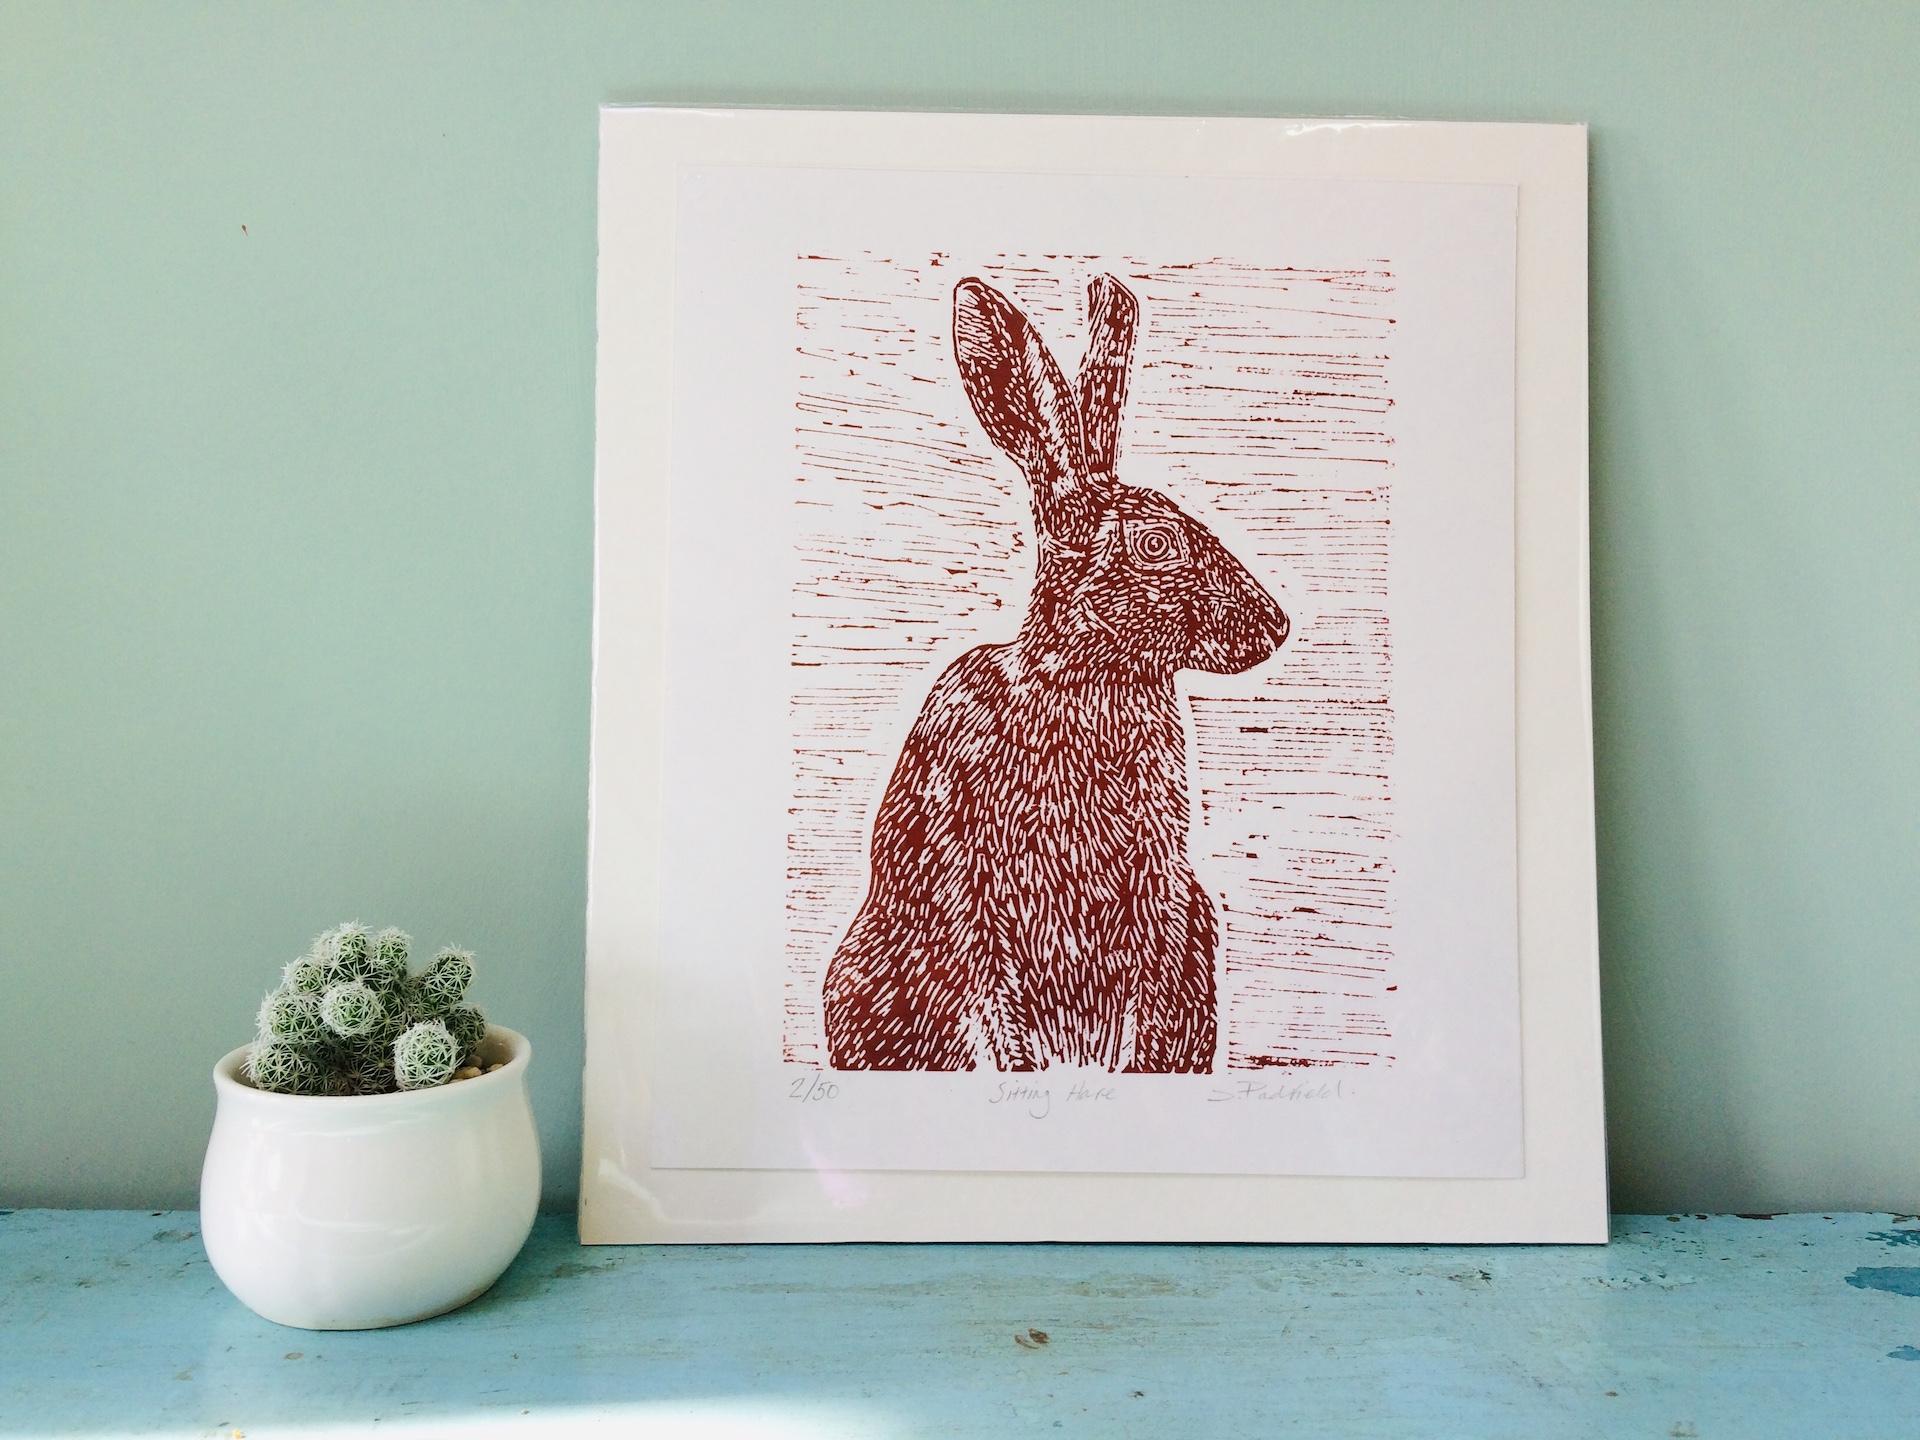 Joanna Padfield
Sitting Hare
Limited Edition Linocut Print on Paper
Edition of 50
Image Size: H20 cm x W 15cm
Paper Size: H25cm x w21cm
Sold Unframed
(Please note that in situ images are purely an indication of how a piece may look)

Sitting Hare is